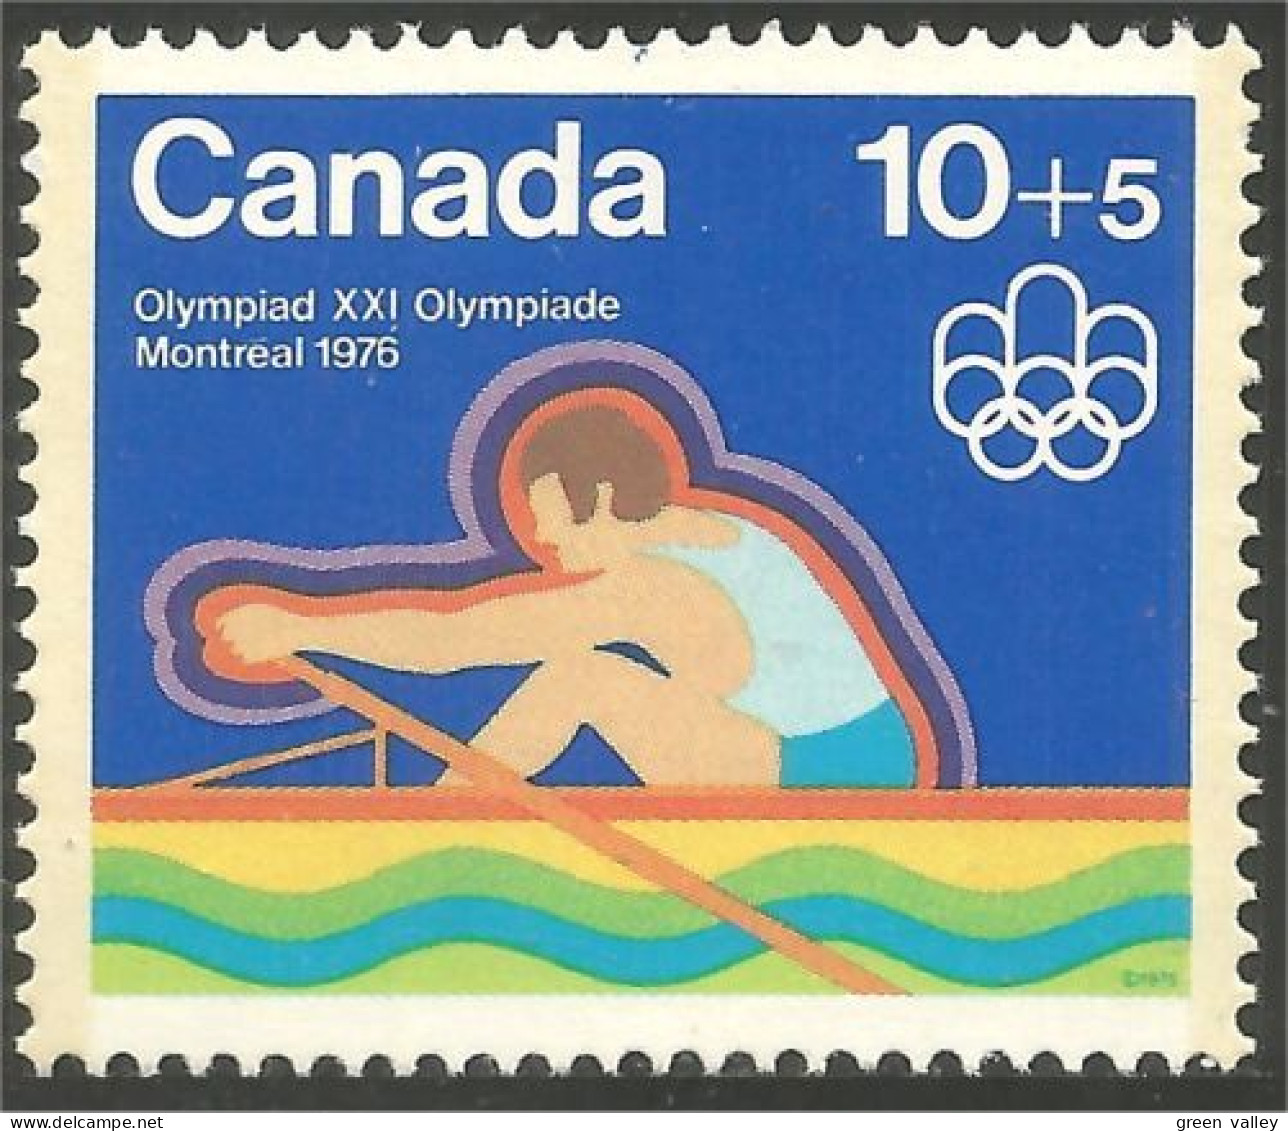 Canada 10c+5c Aviron Rowing Jeux Olympiques Montreal 1976 Olympic Games MNH ** Neuf SC (CB-05c) - Verano 1976: Montréal